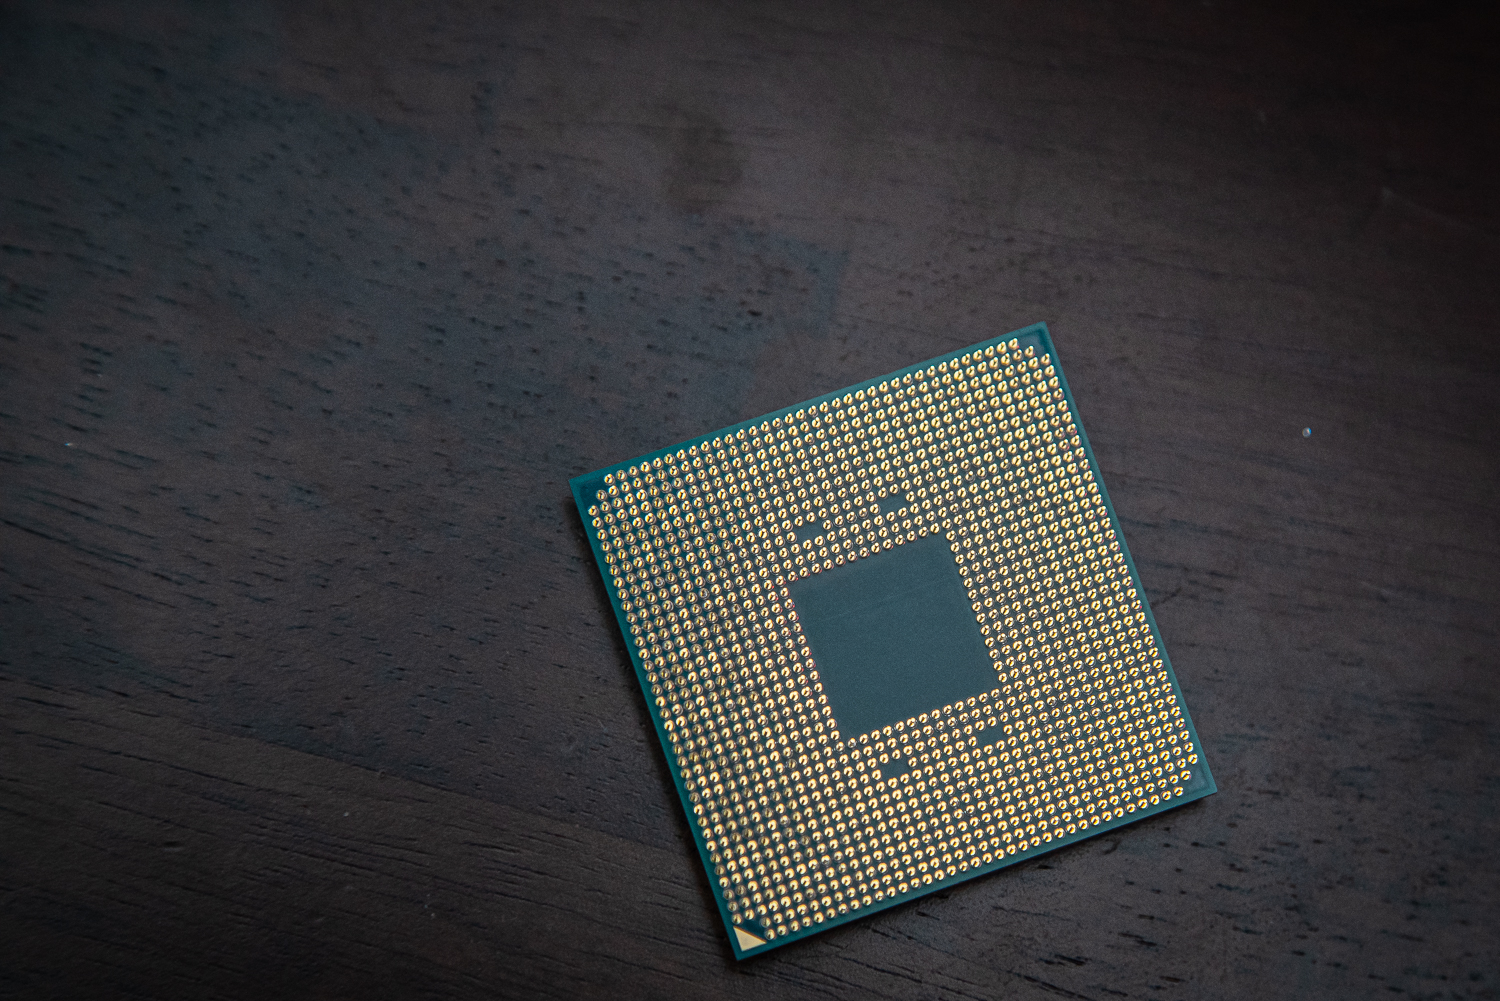 AMD Ryzen 7 5800X3D review: The world's fastest gaming CPU 